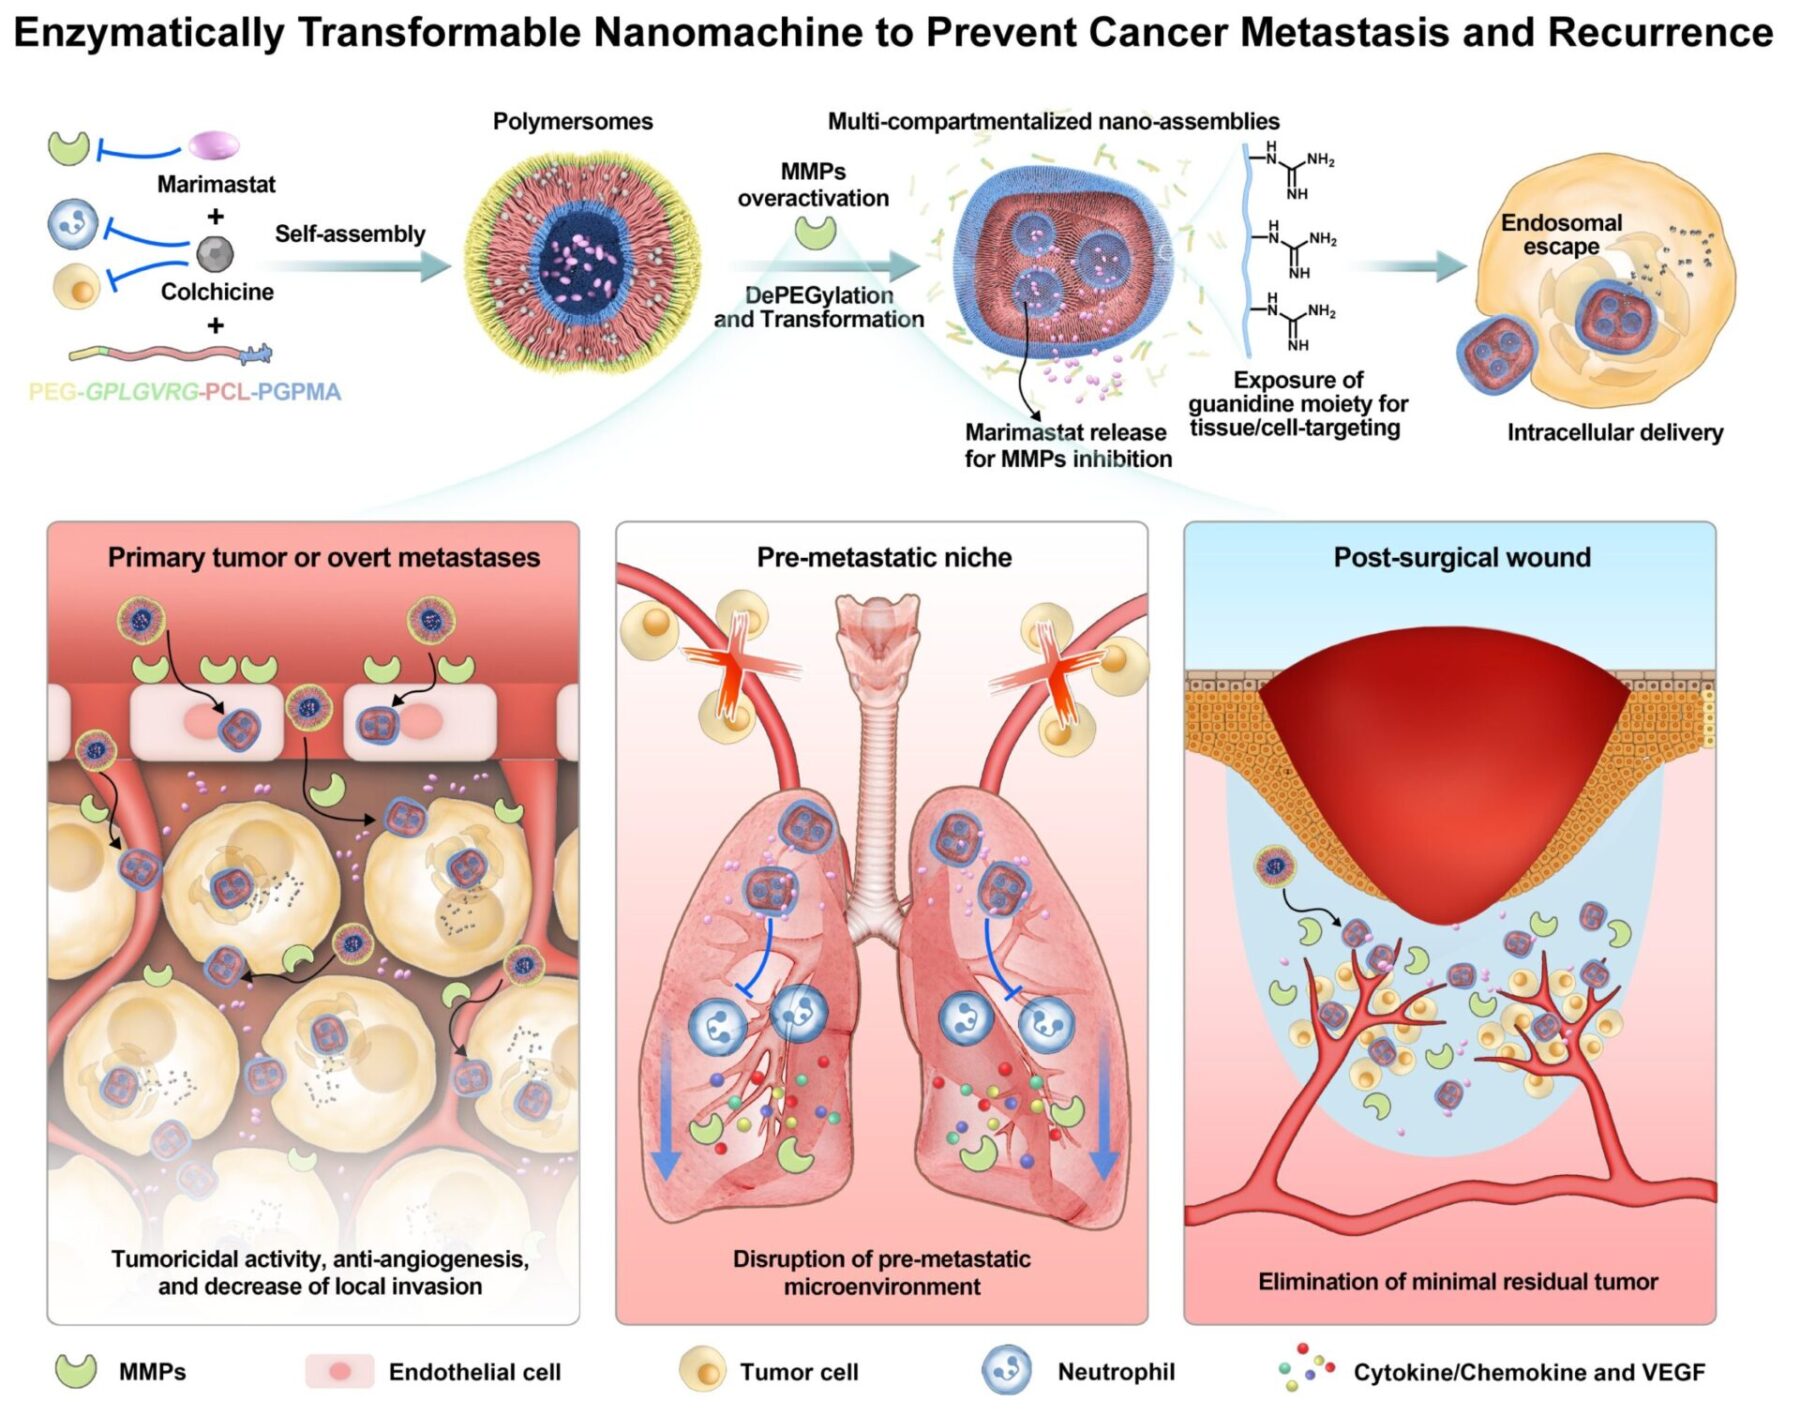 Left: Primary tumor or overt metastasis Center: Center: Pre-metastatic niche Right: Post-surgical wound

CREDIT
2021 Innovation Center of NanoMedicine